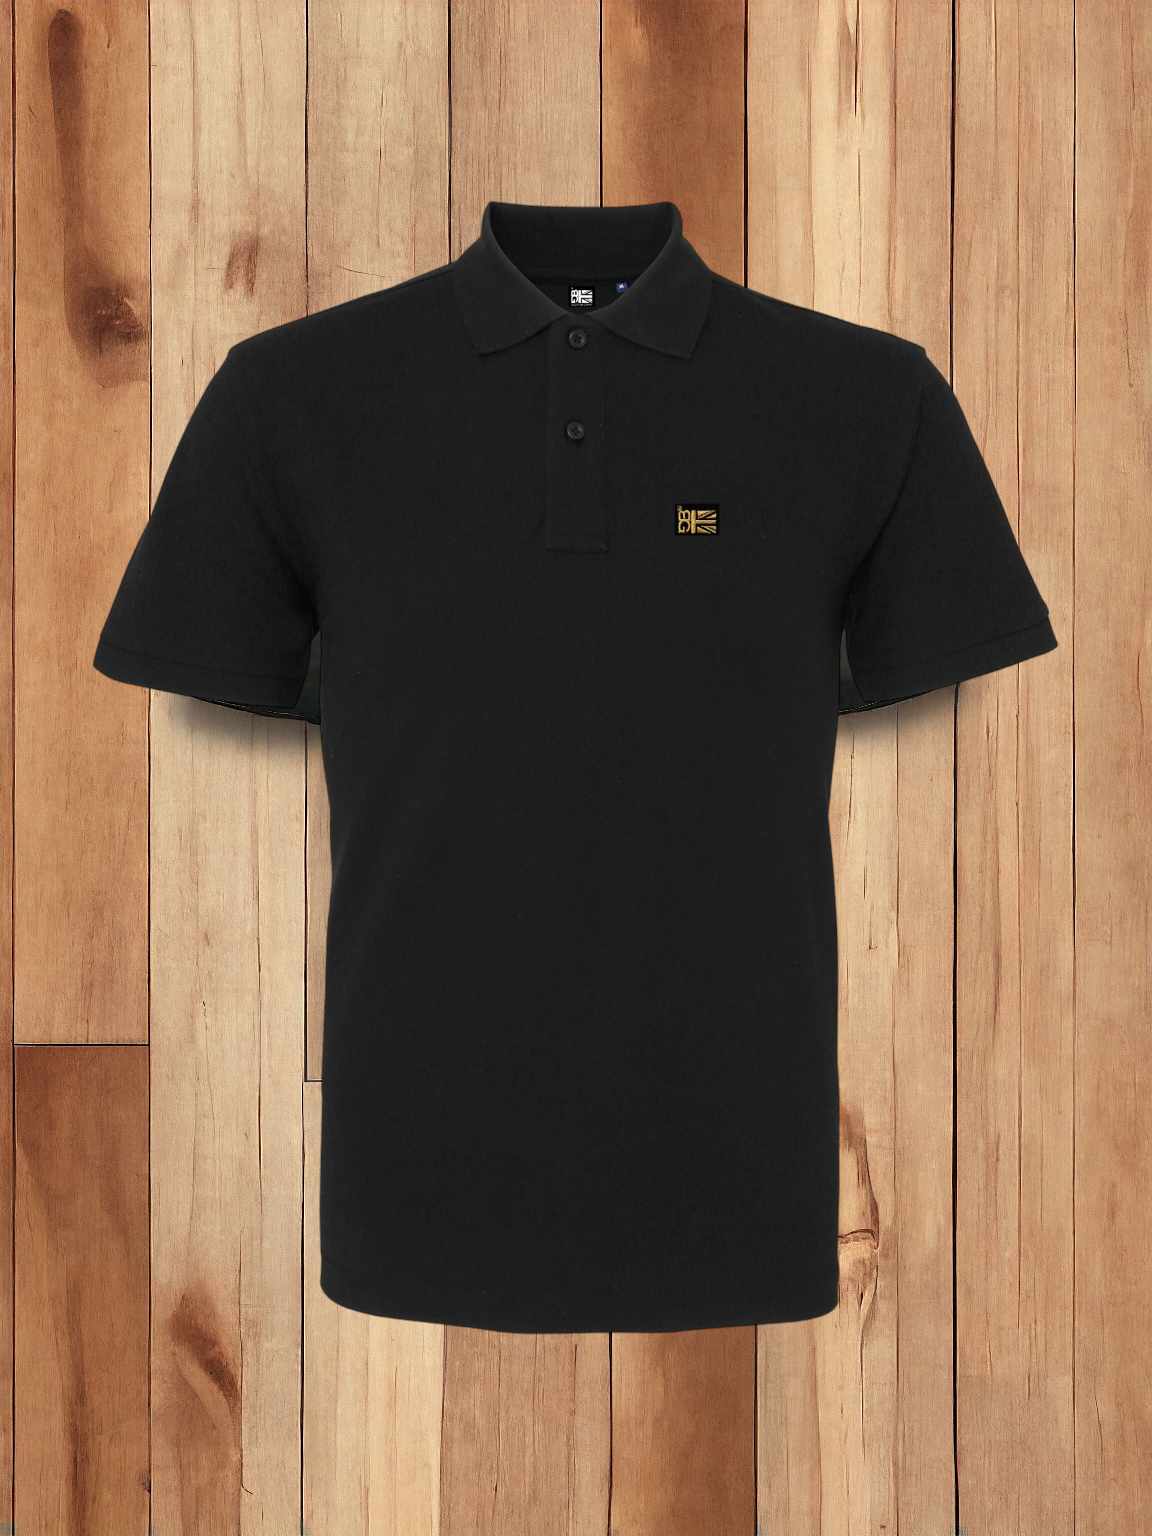 The Great British Polo - Men's